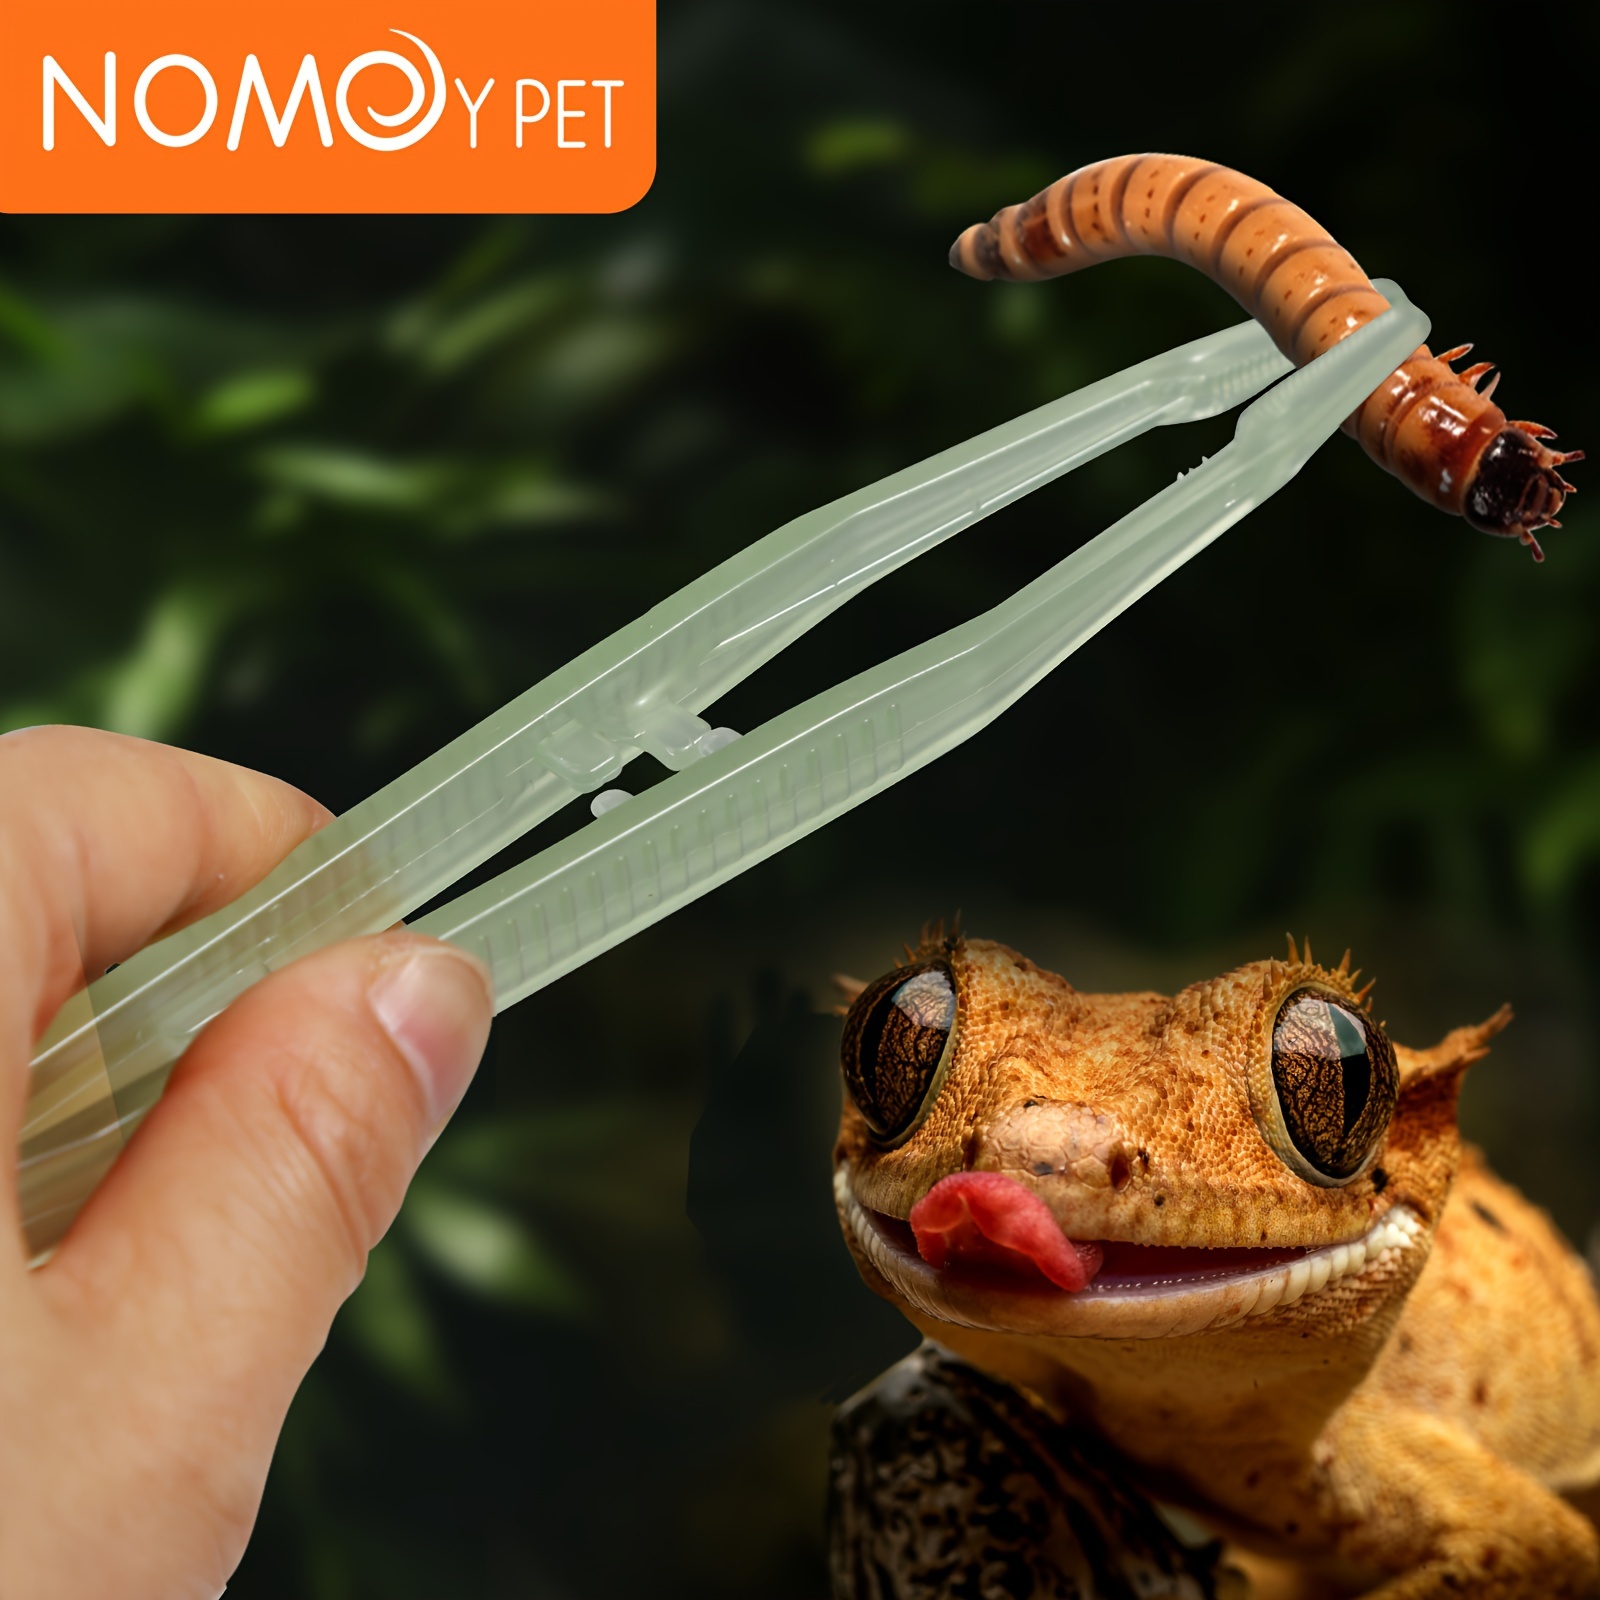 11 Long Reptiles Tweezers Serving Tongs Eco-friendly Bamboo Curved  Tweezers for Snake Gecko Reptile Feeding Tongs 